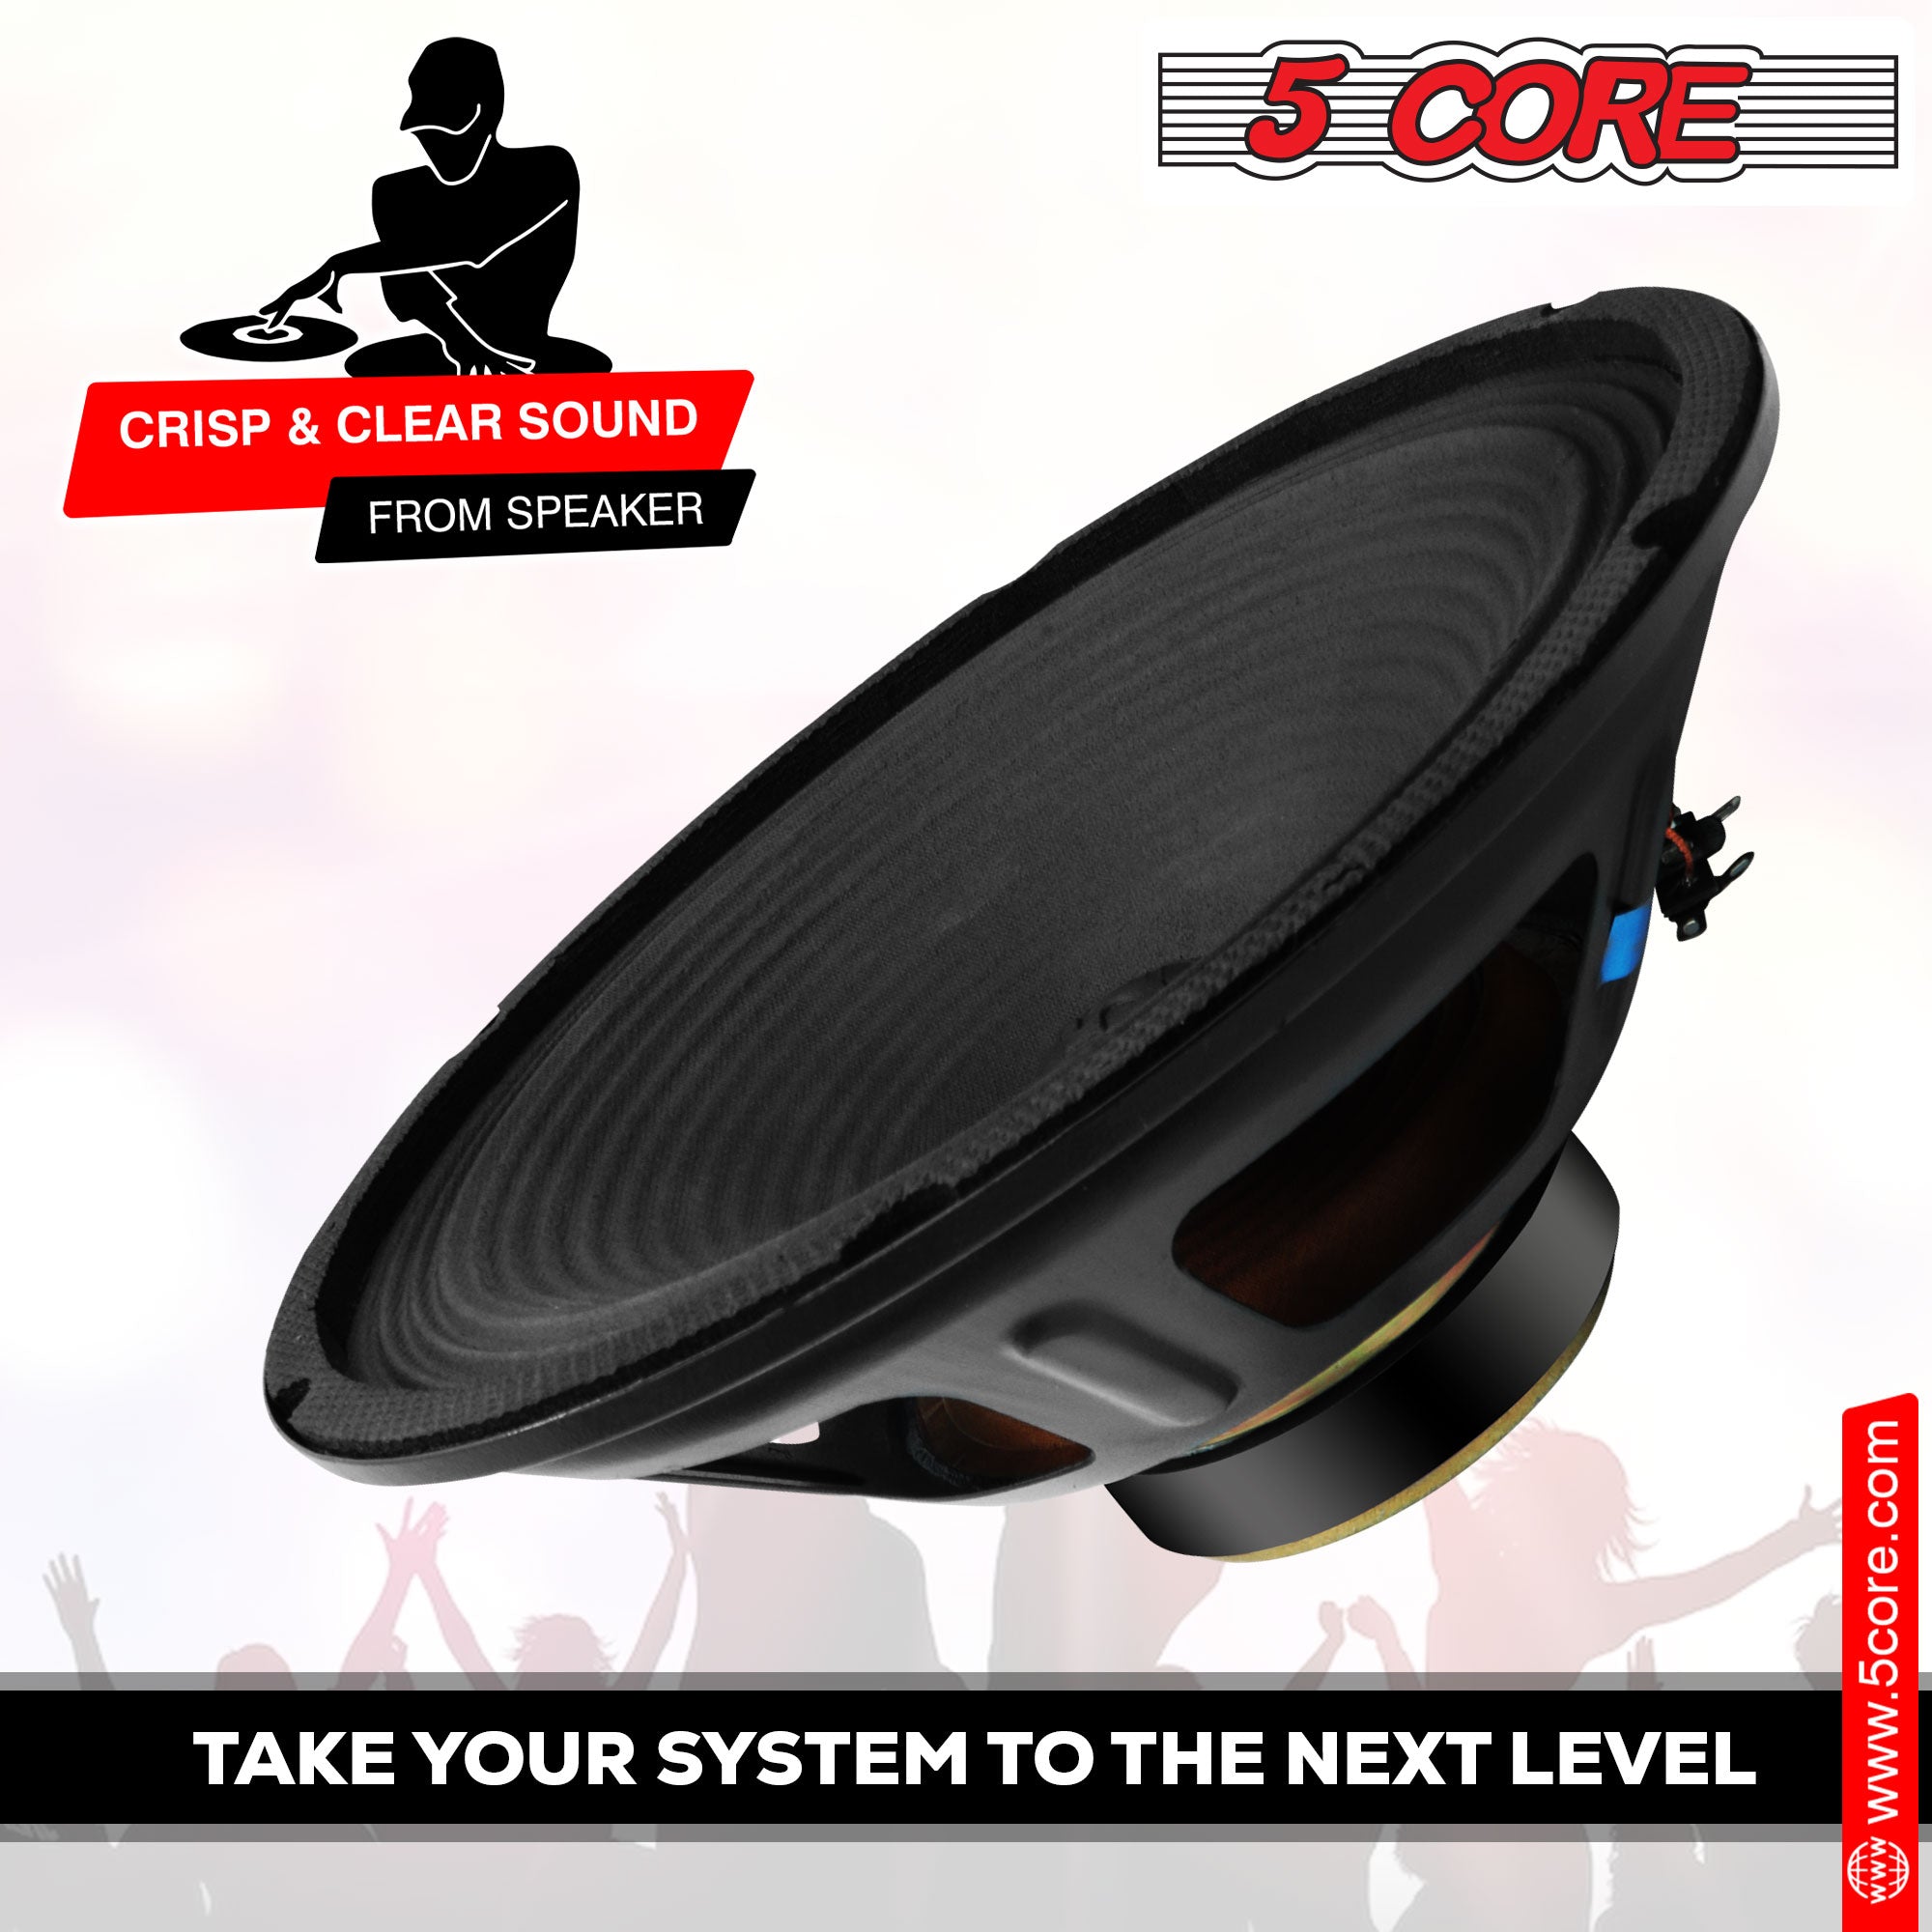 5 core 10 inch subwoofer take your system to the next level.